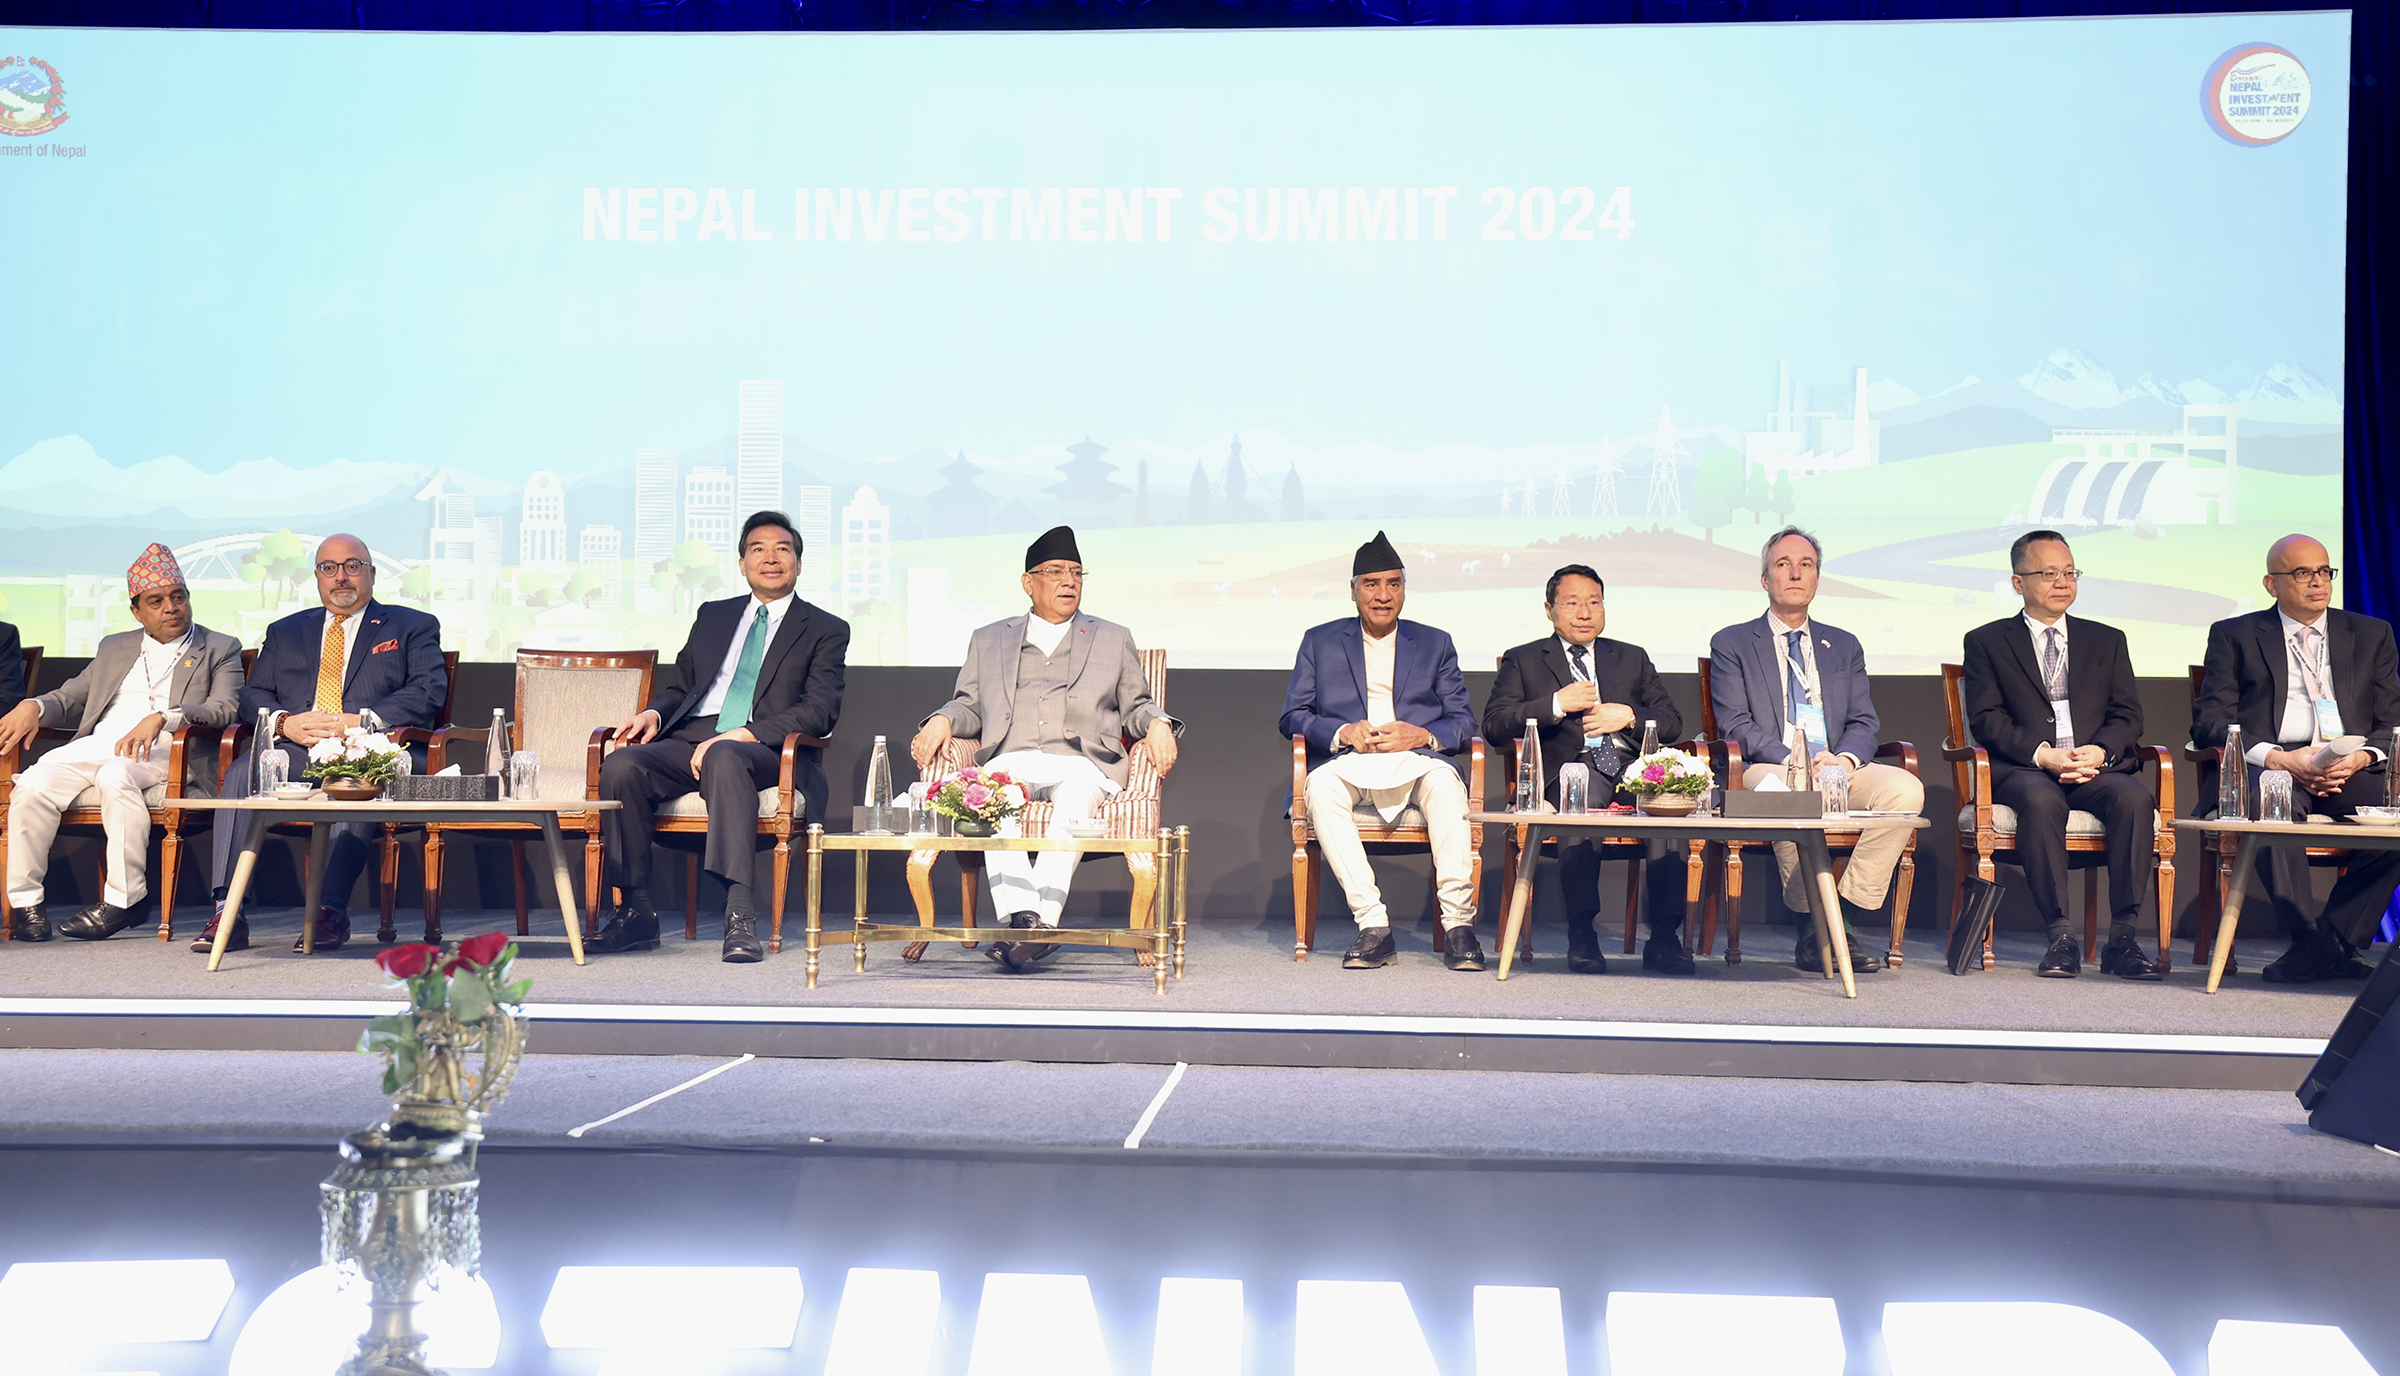 3rd Investment Summit: Govt seeking letters of intent for 20 projects